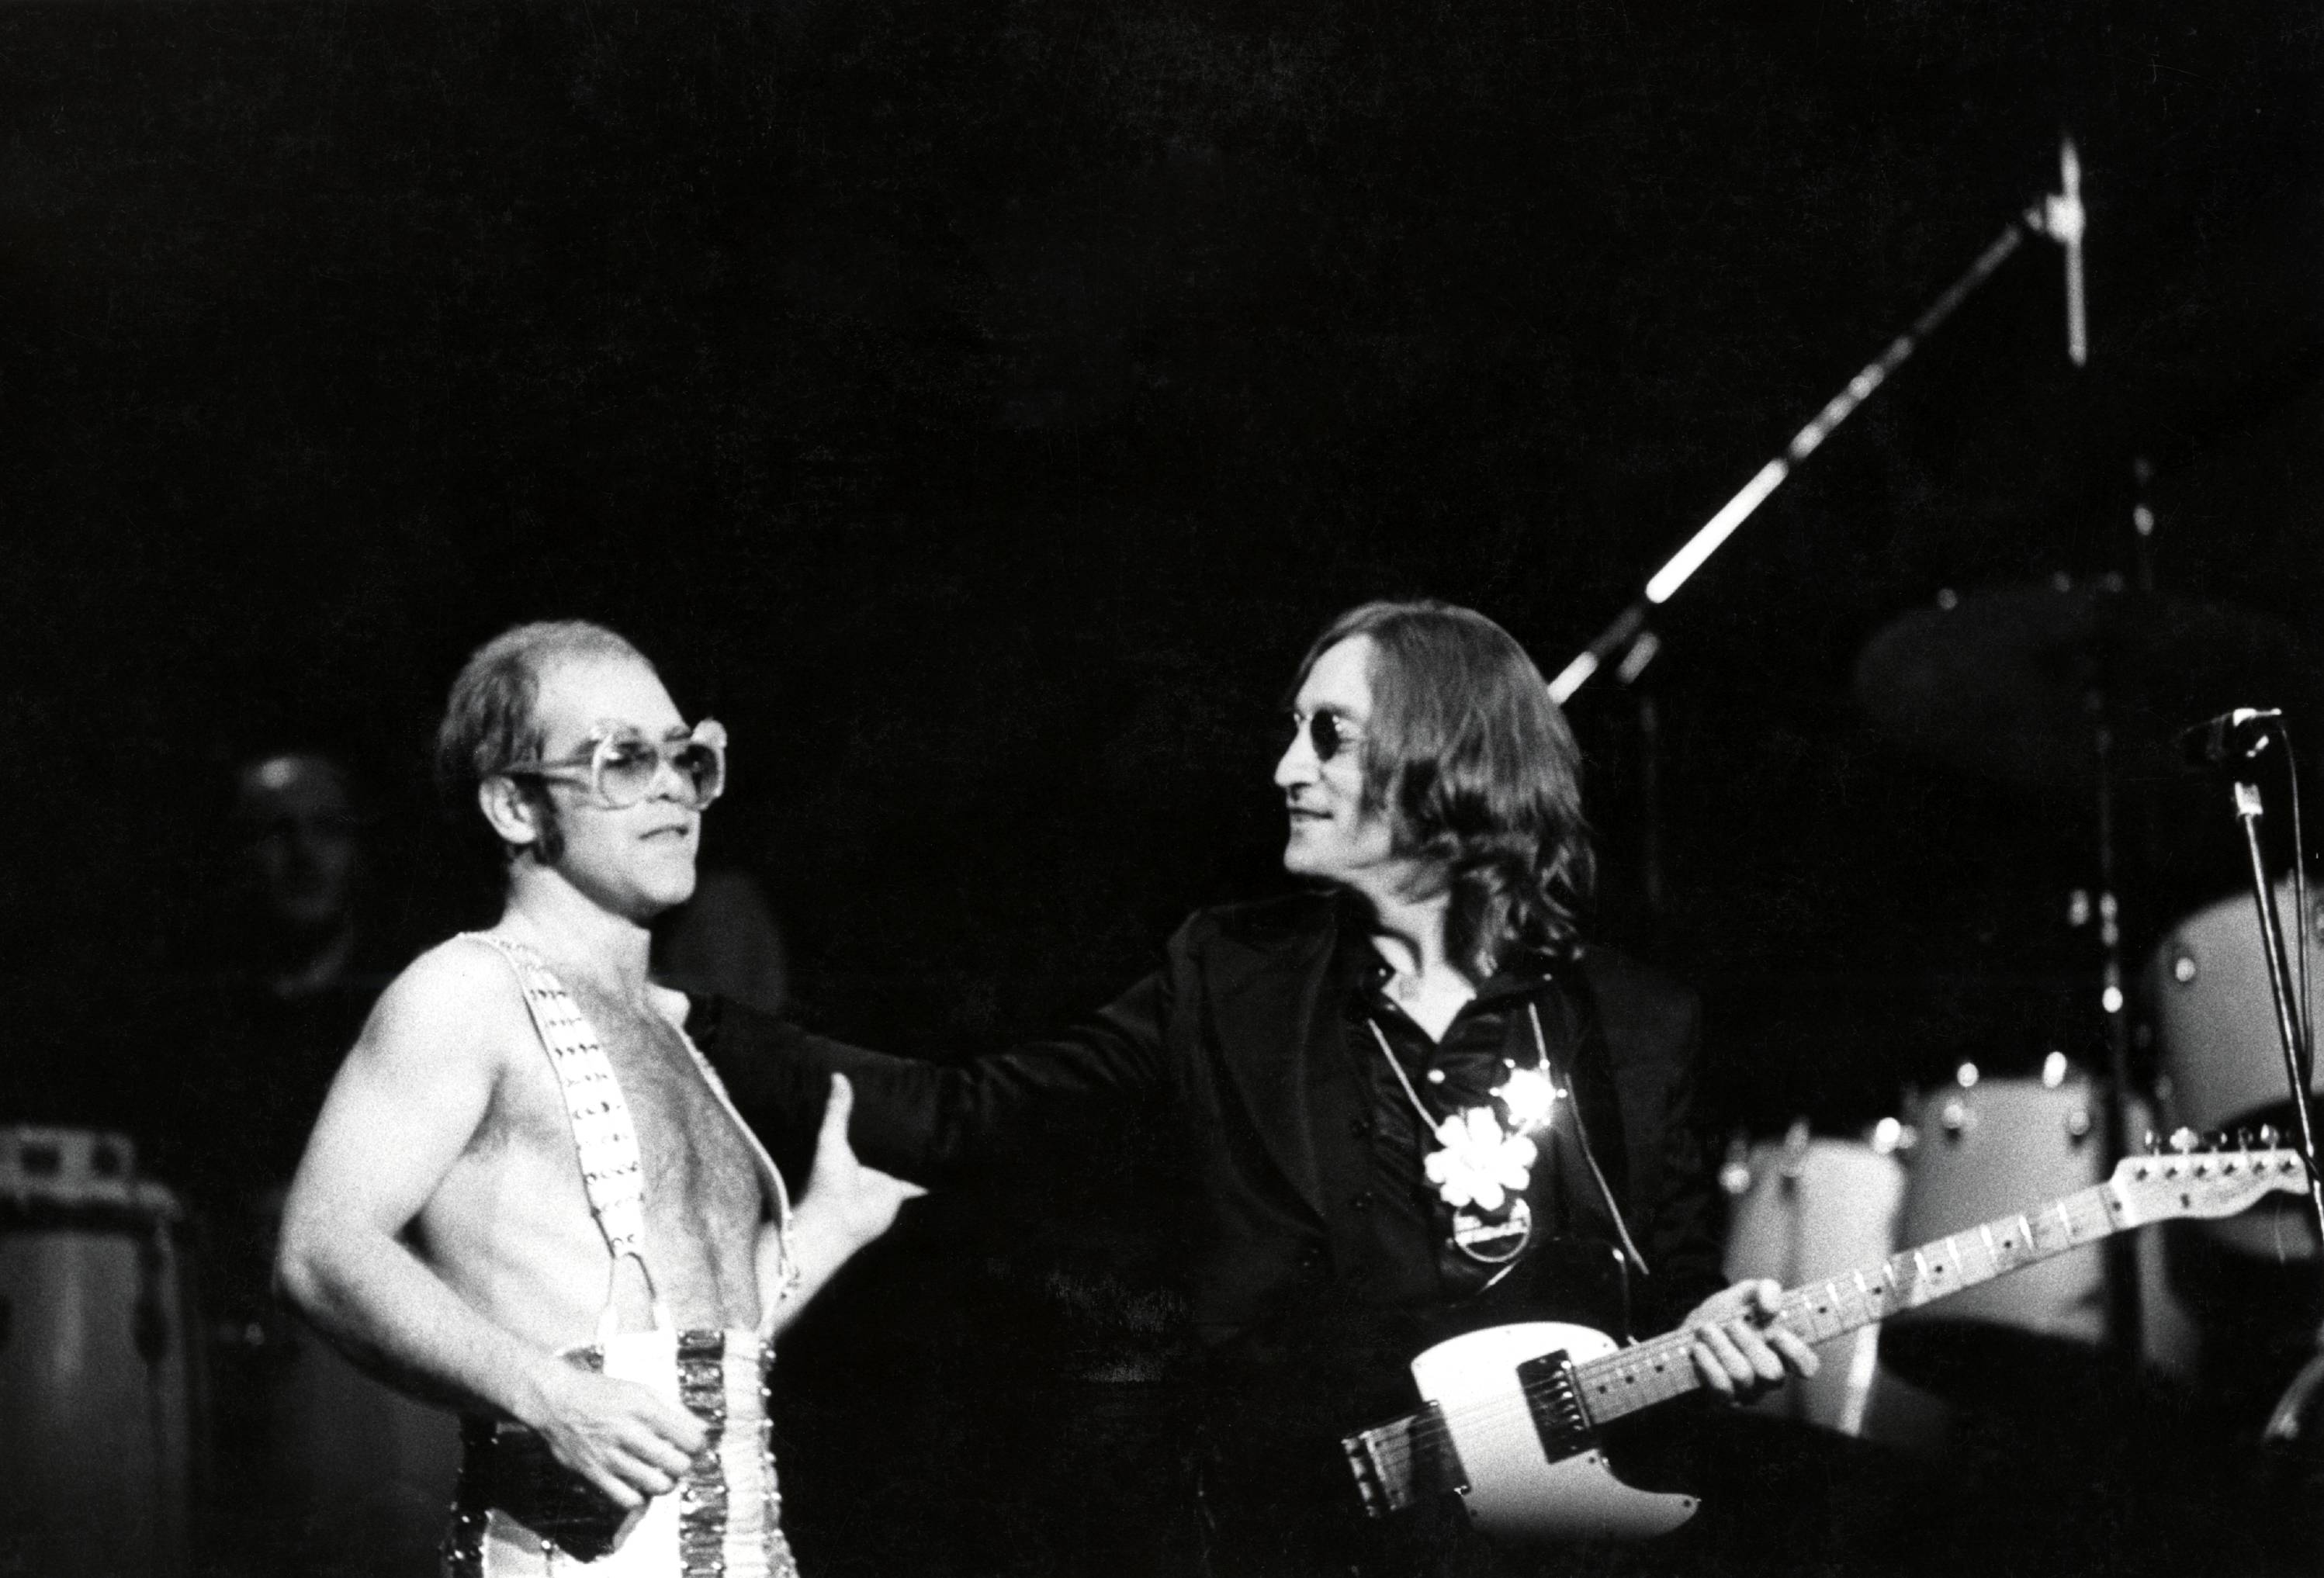 A black and white picture of Elton John and John Lennon on stage together. Lennon holds a guitar.